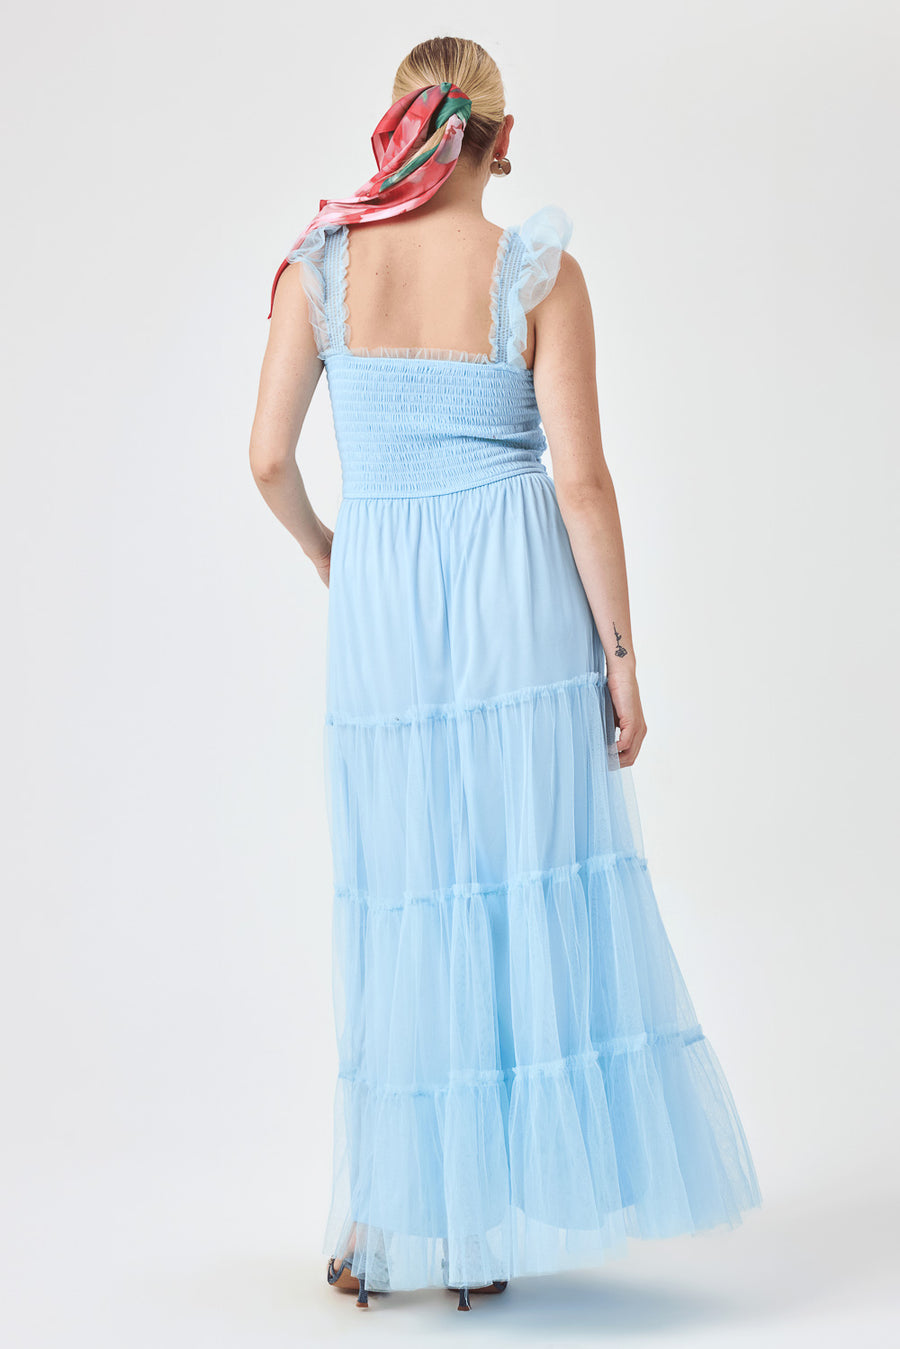 SMOCK TOP TULLE MAXI SUMMERSONG - Trixxi Clothing